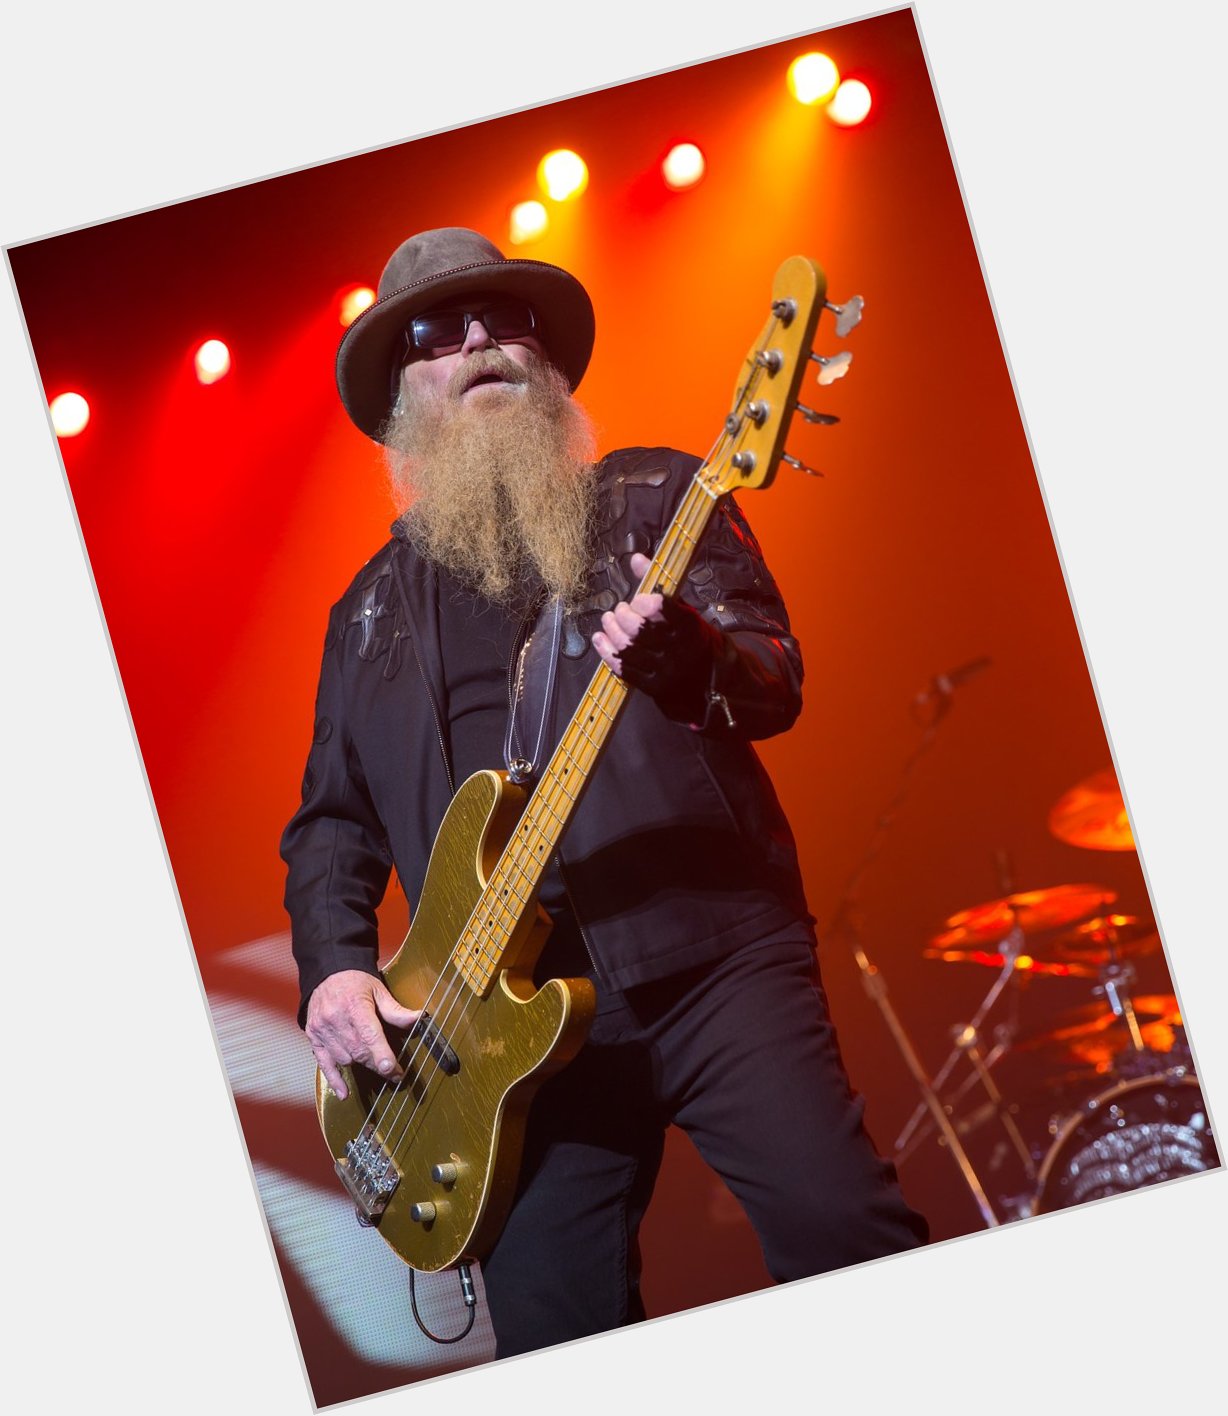 Please join me here at in wishing \s Joseph \Dusty\ Hill a very Happy 72nd Birthday today  